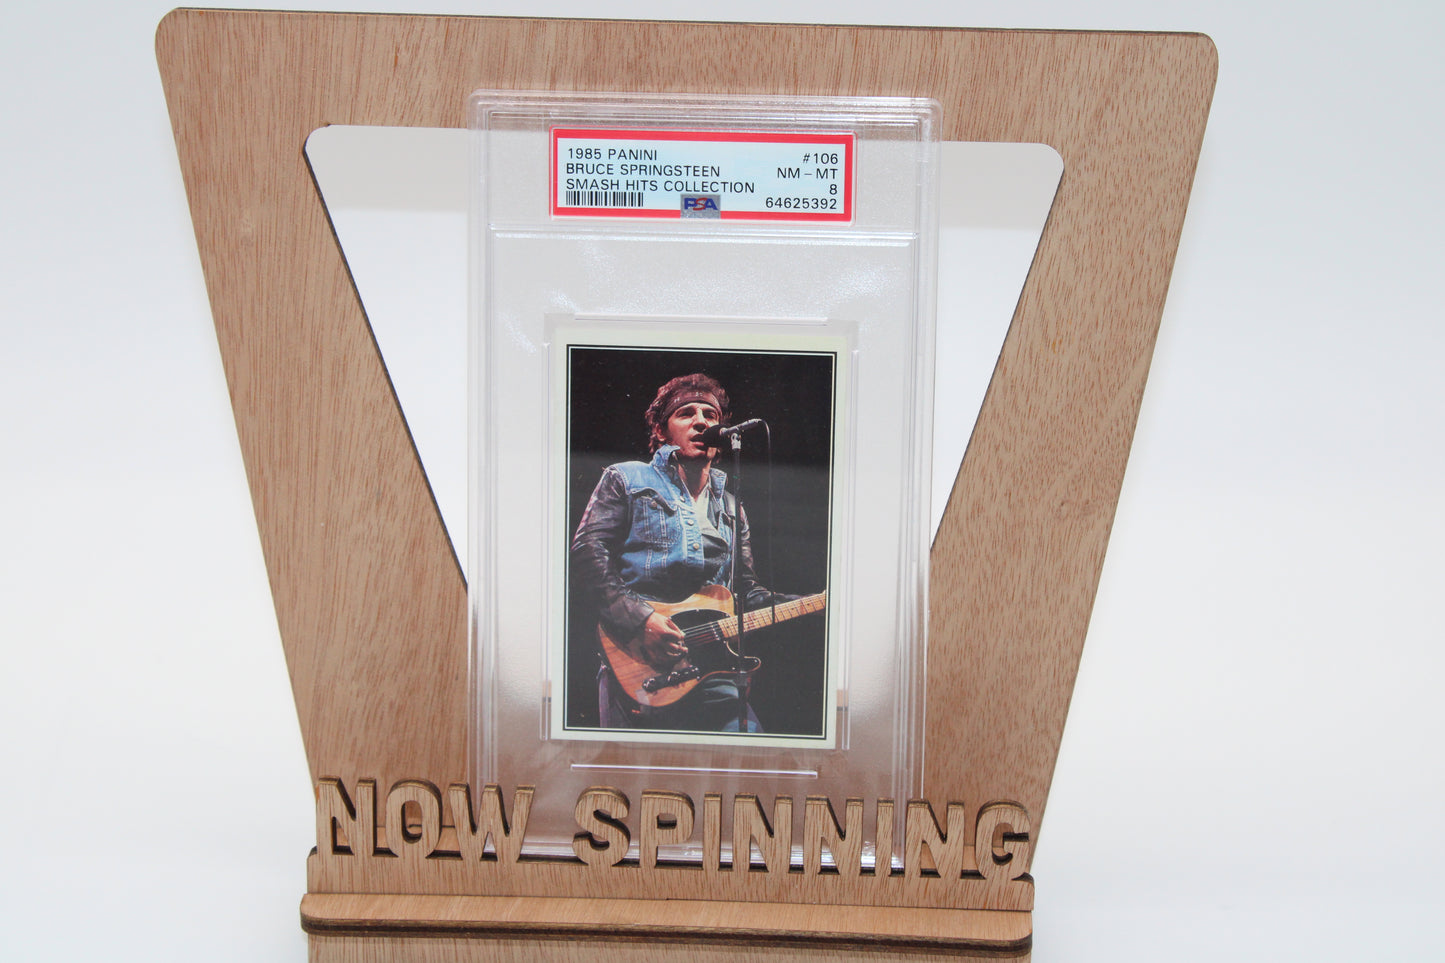 Bruce Springsteen Panini Smash Hits Collectible 1985 Card #106 - PSA Graded 8 / none higher